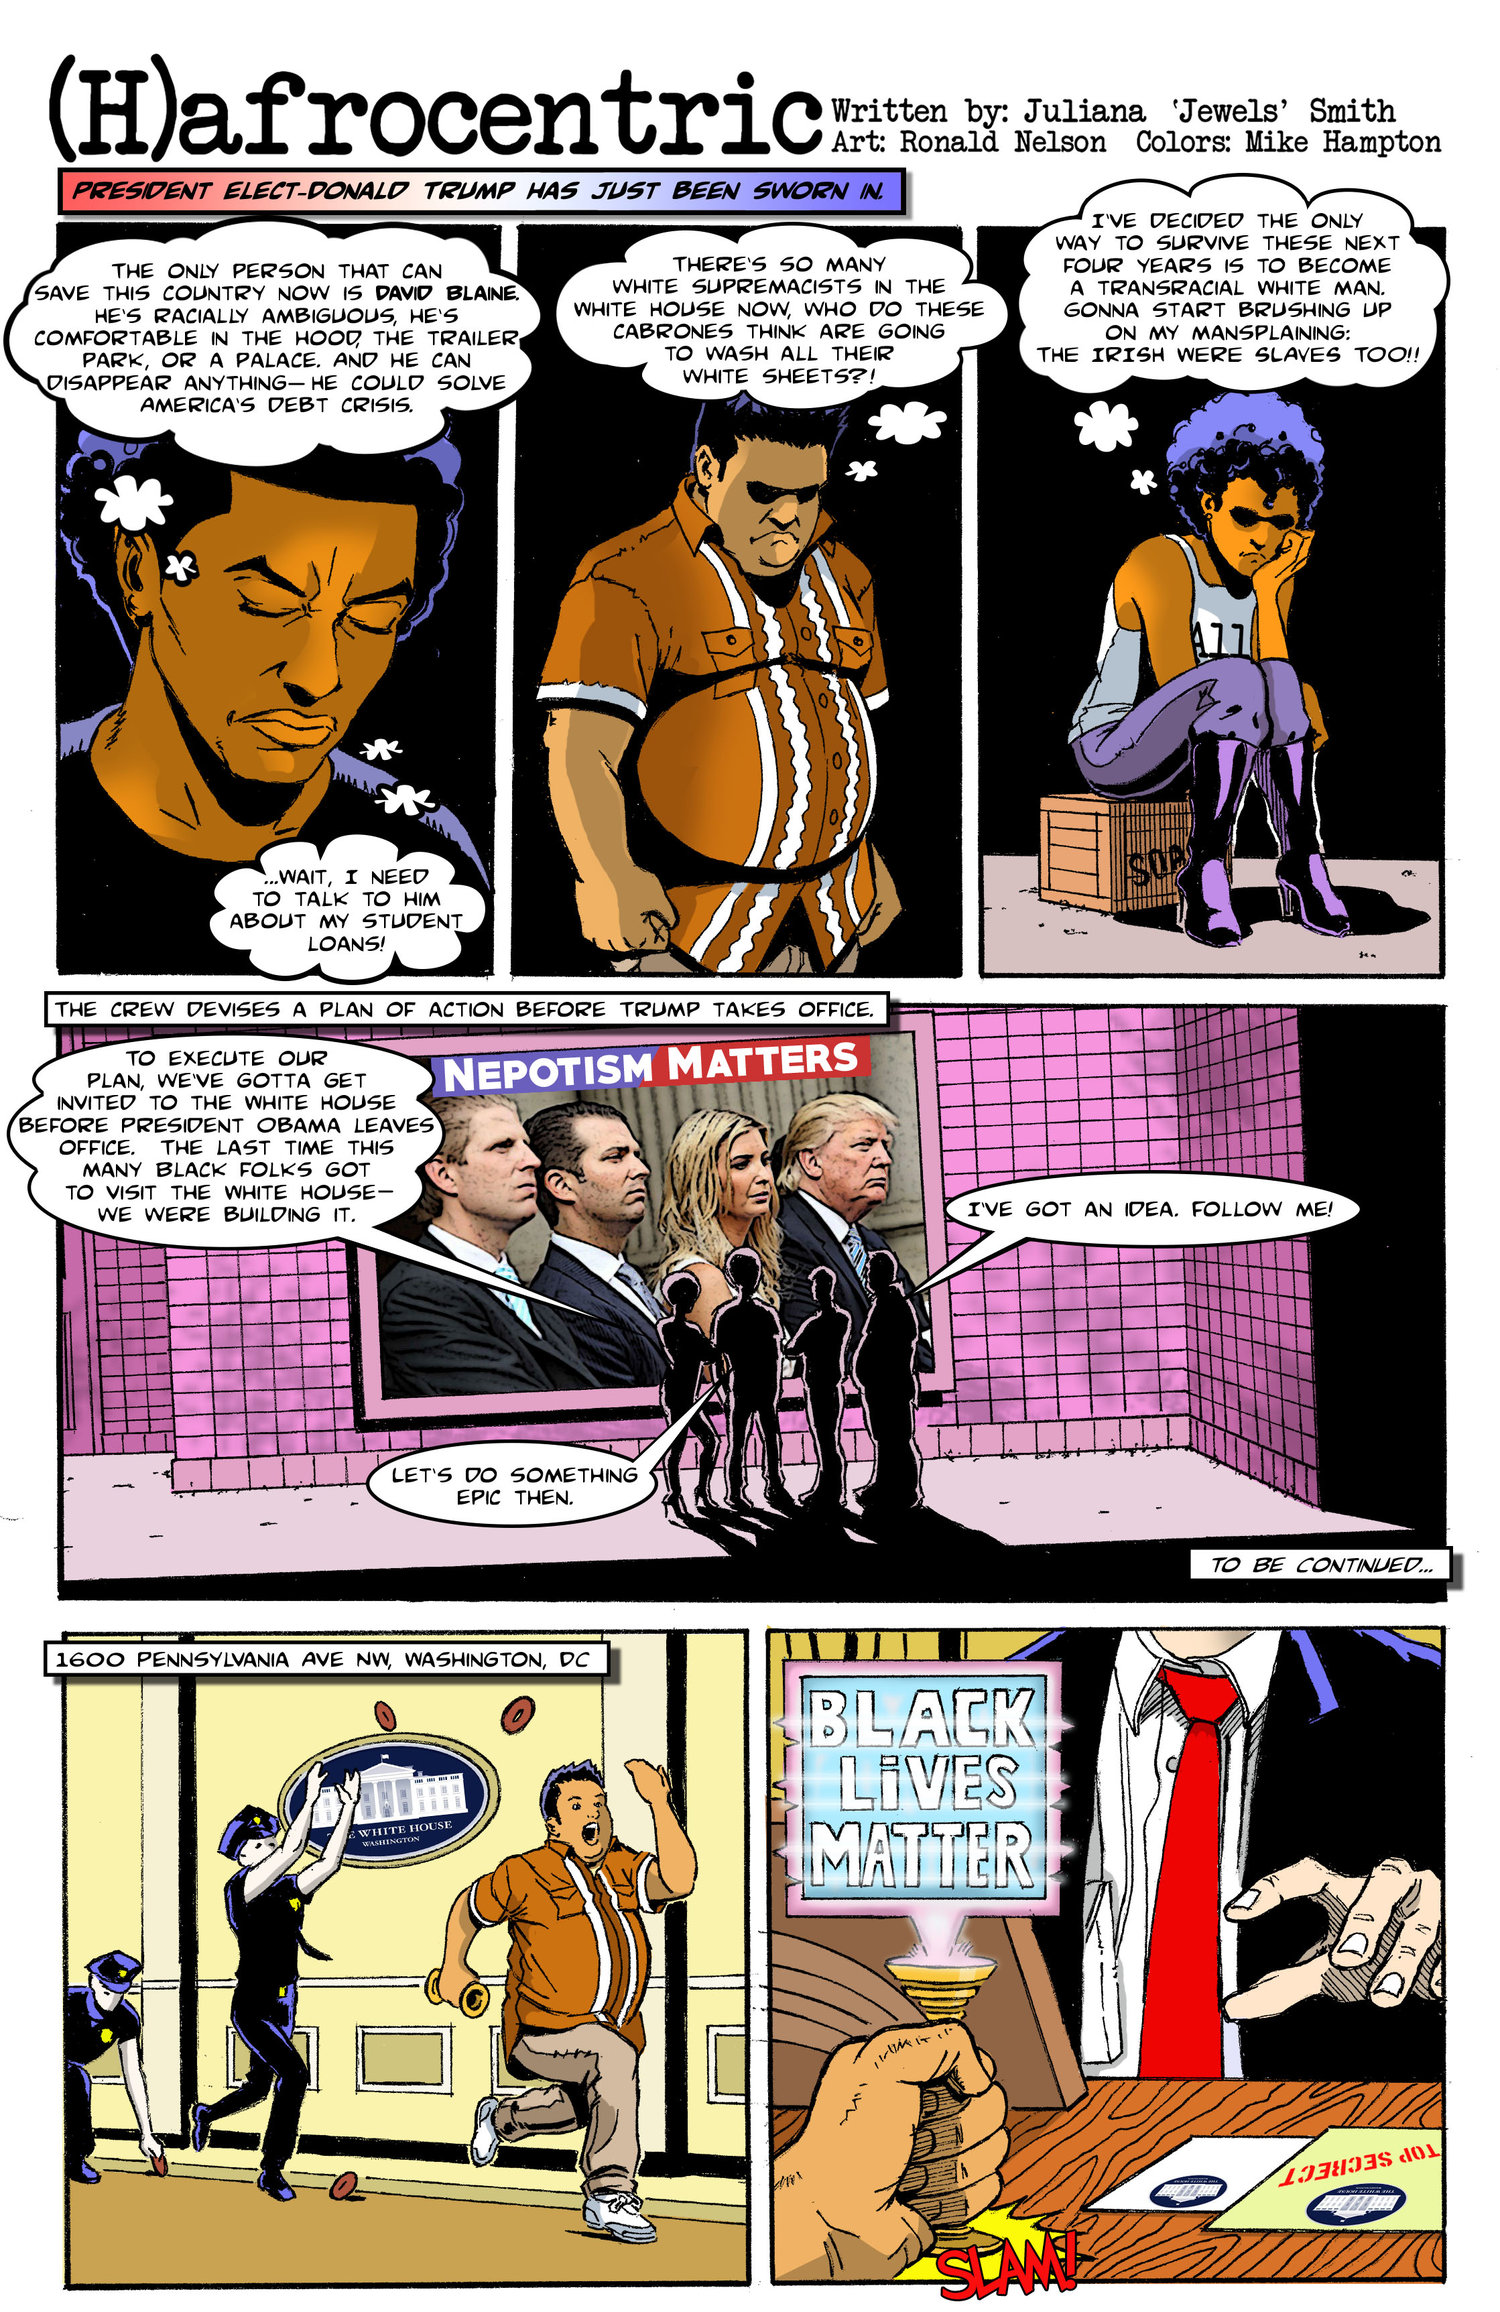 SPECIAL INAUGURAL EDITION COMIC STRIP — (H)afrocentric